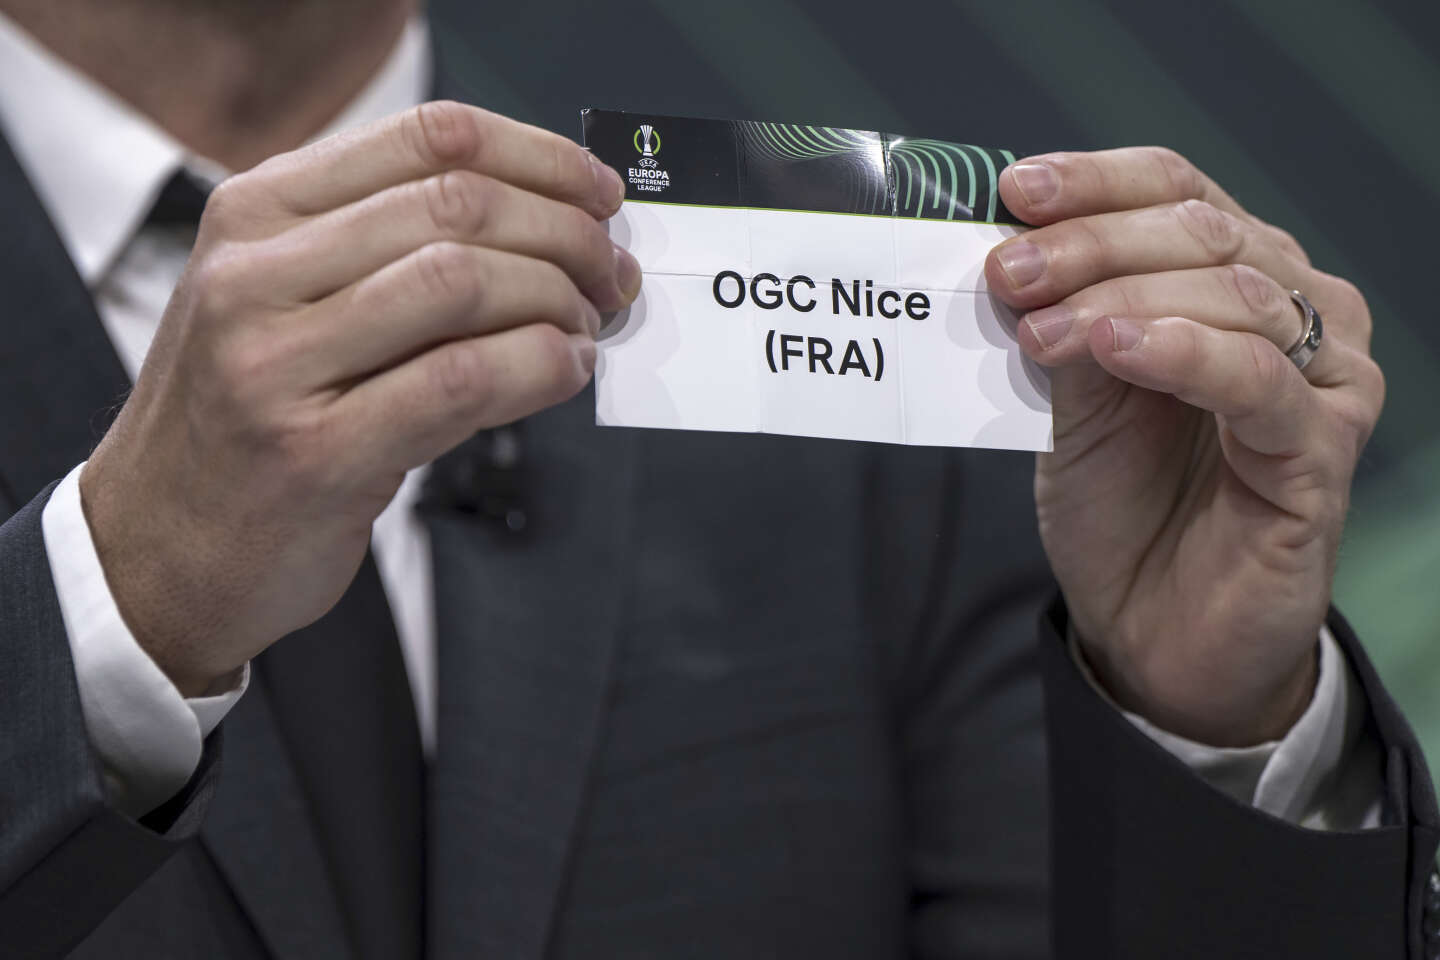 OGC Nice will face FC Basel in the quarter-finals